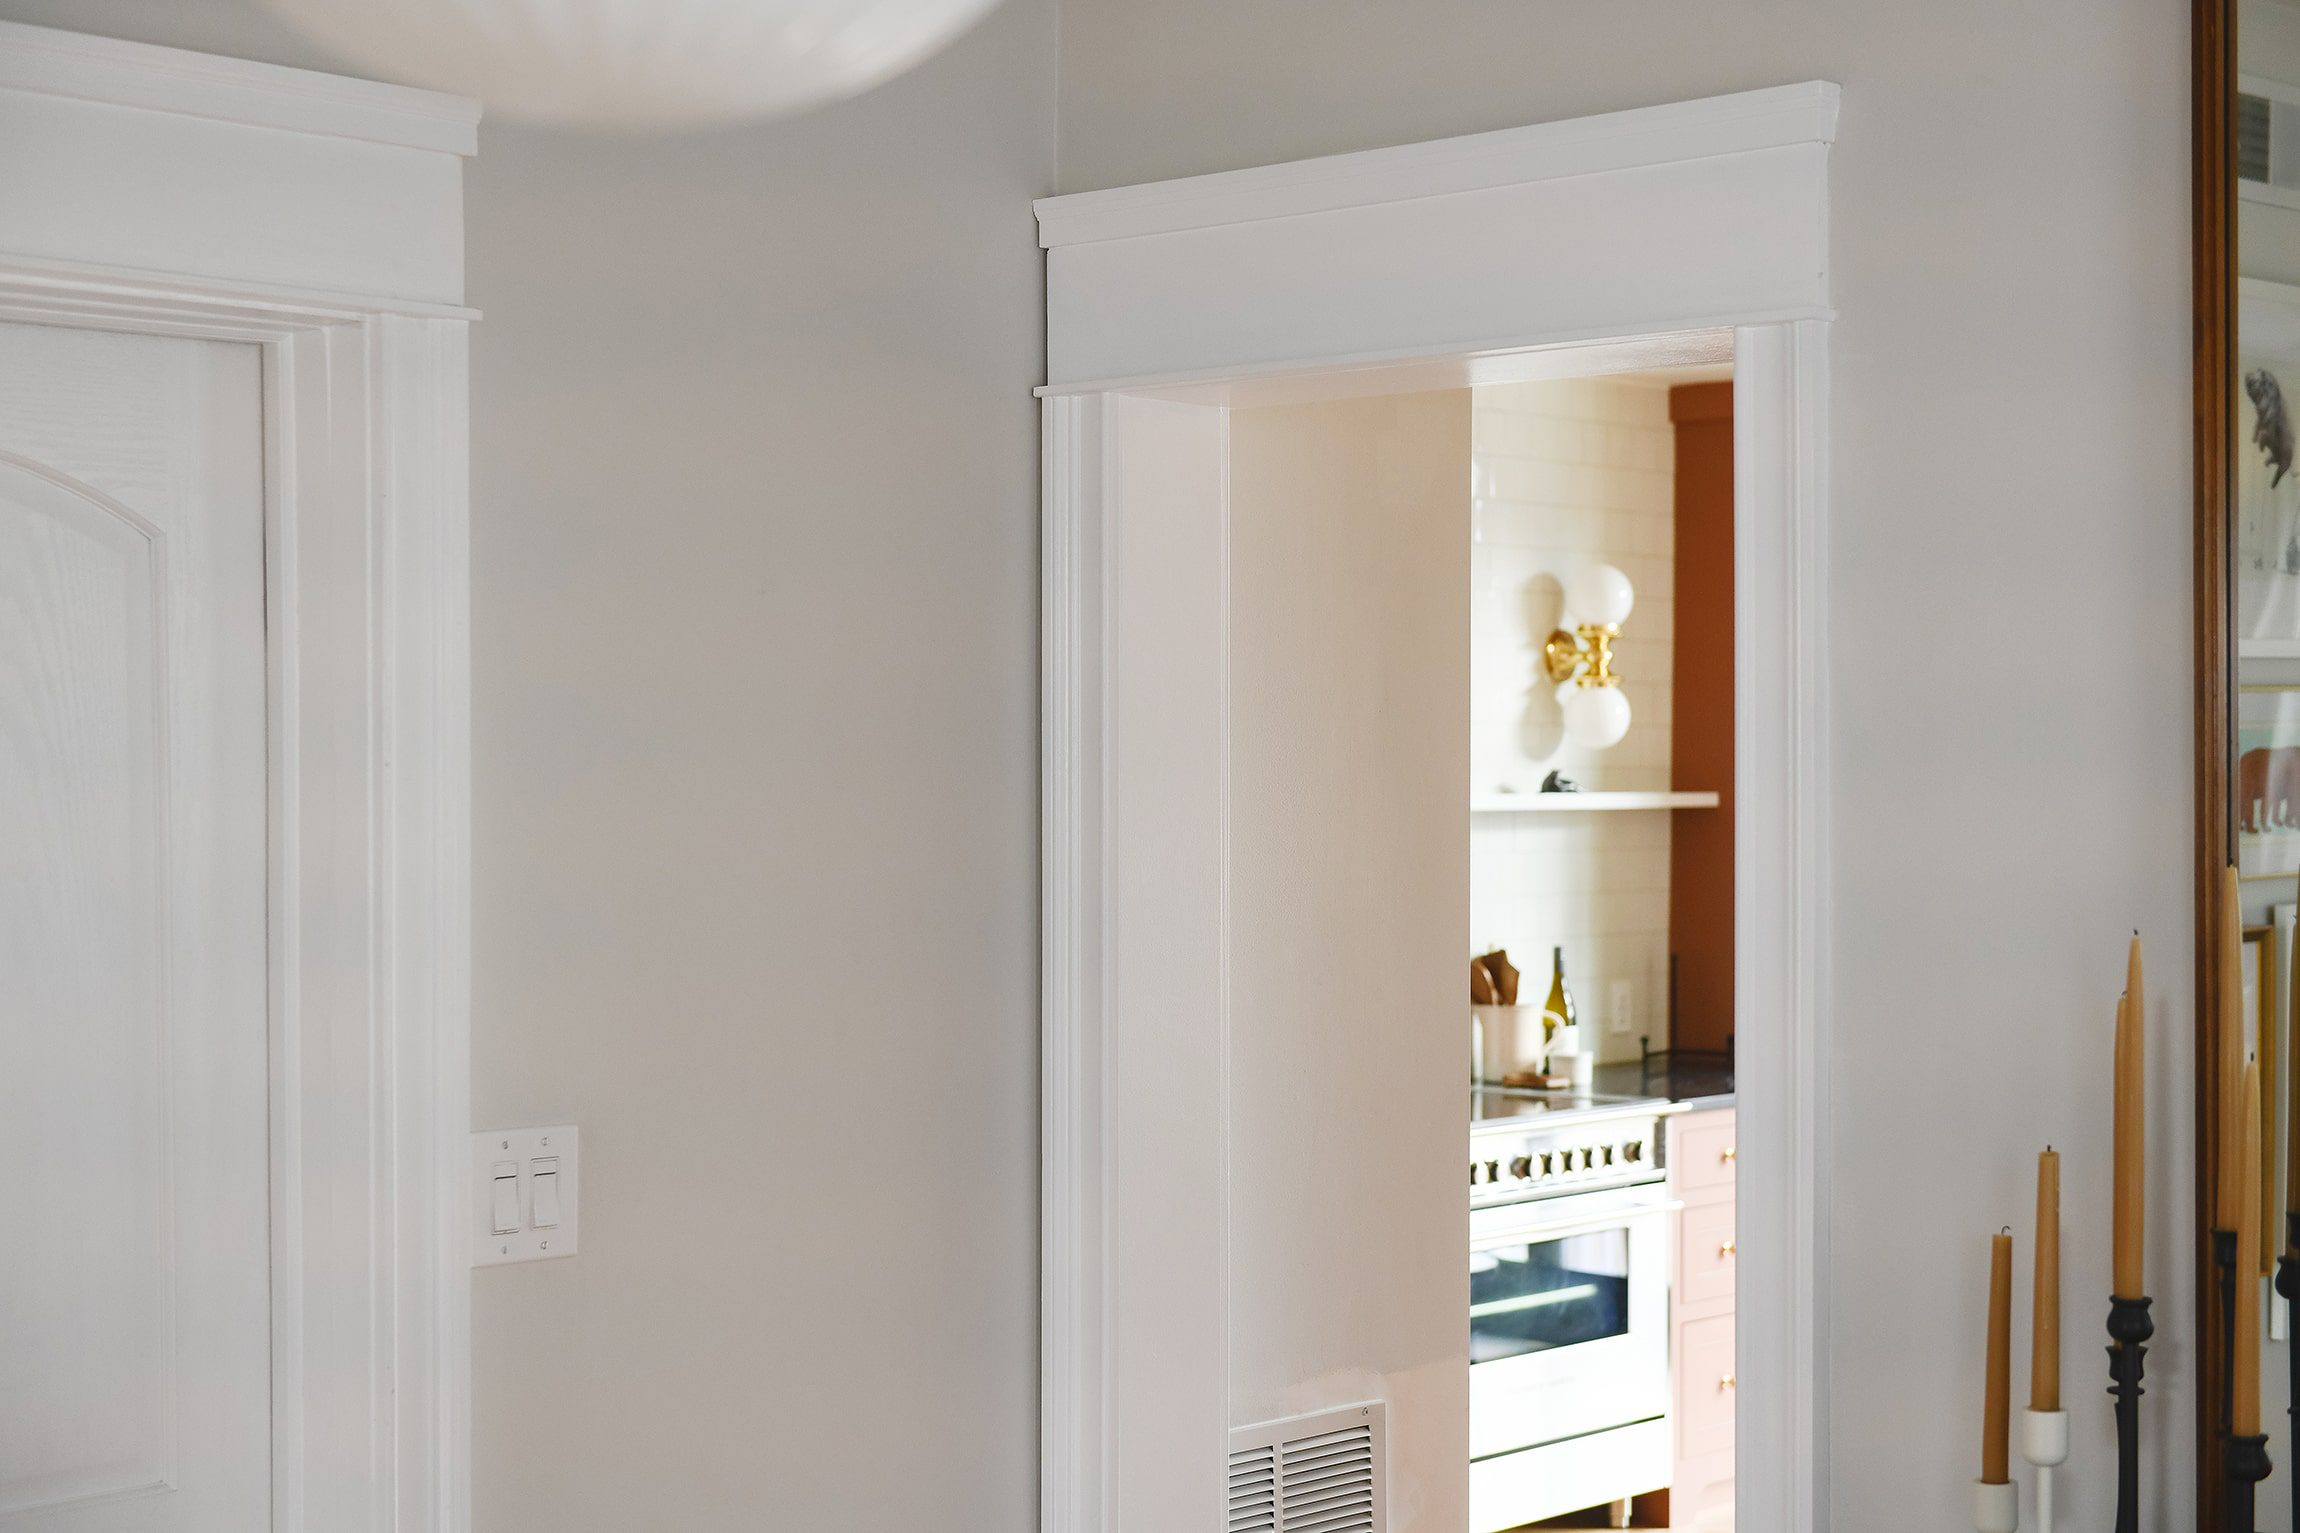 The completed upper millwork // via yellow brick home